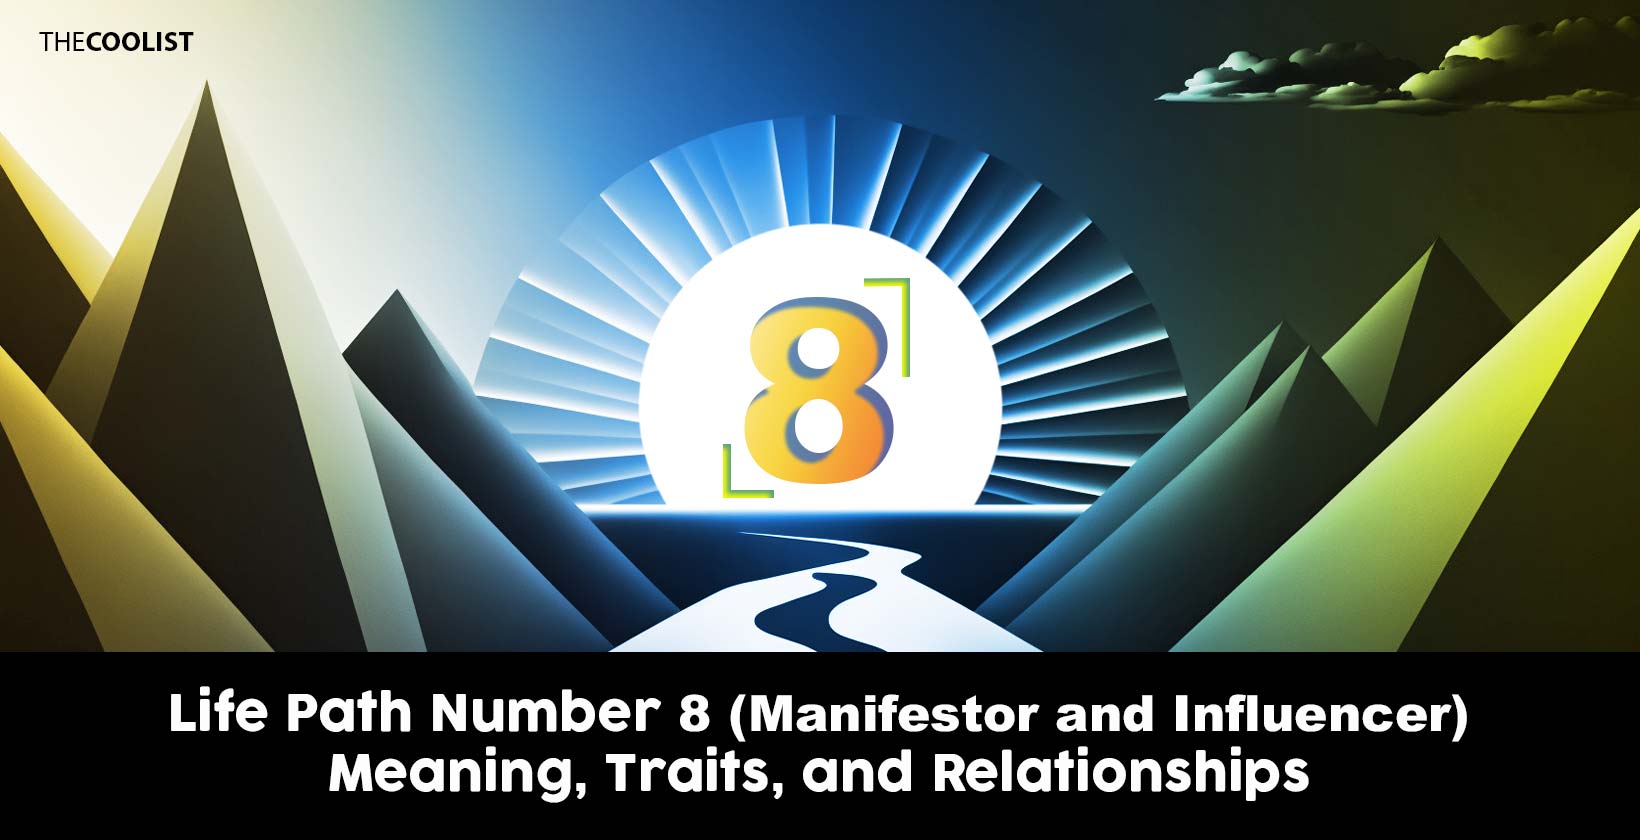 Life Path Number 8 (Manifestor and Influencer) Meaning, Traits, and Relationships